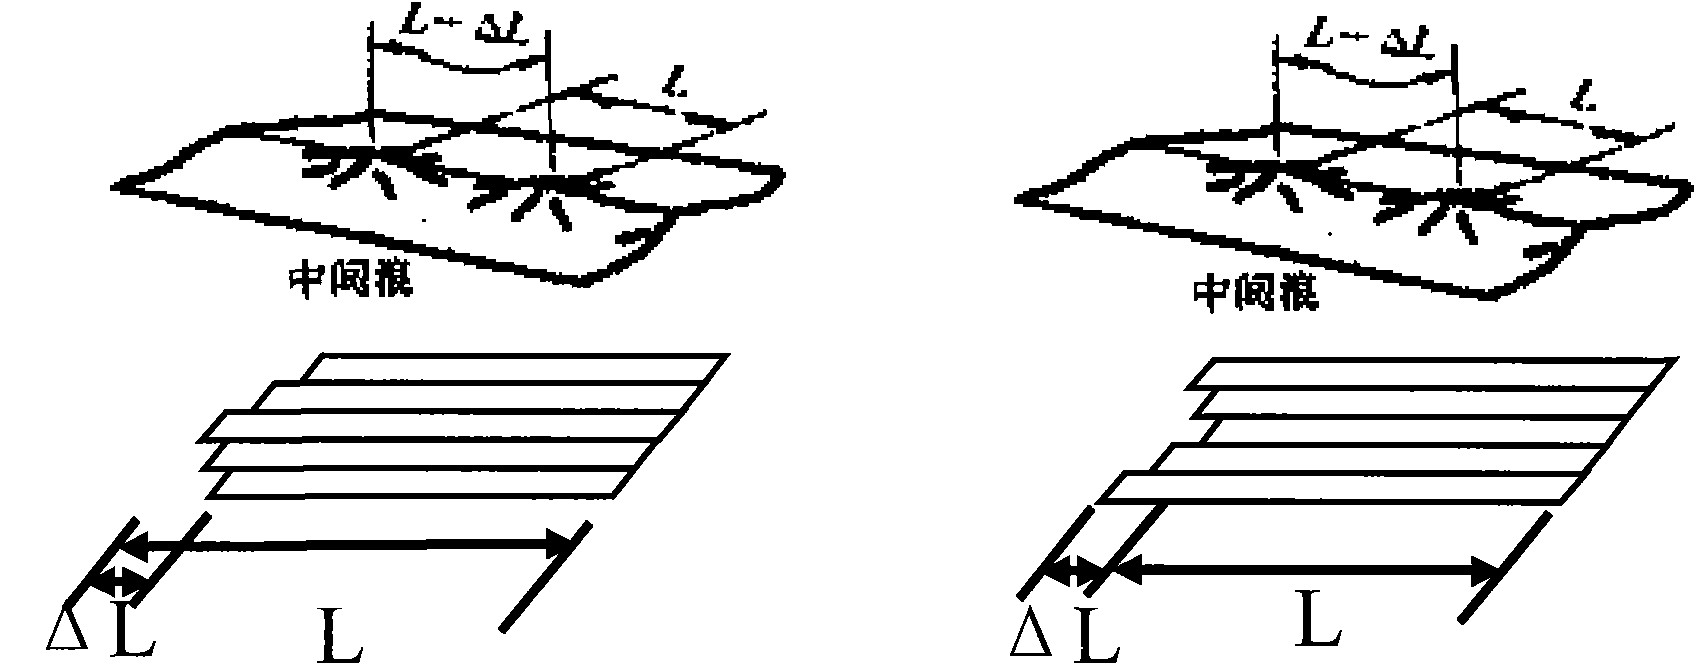 Plate shape control method with target of reducing maximum deviation